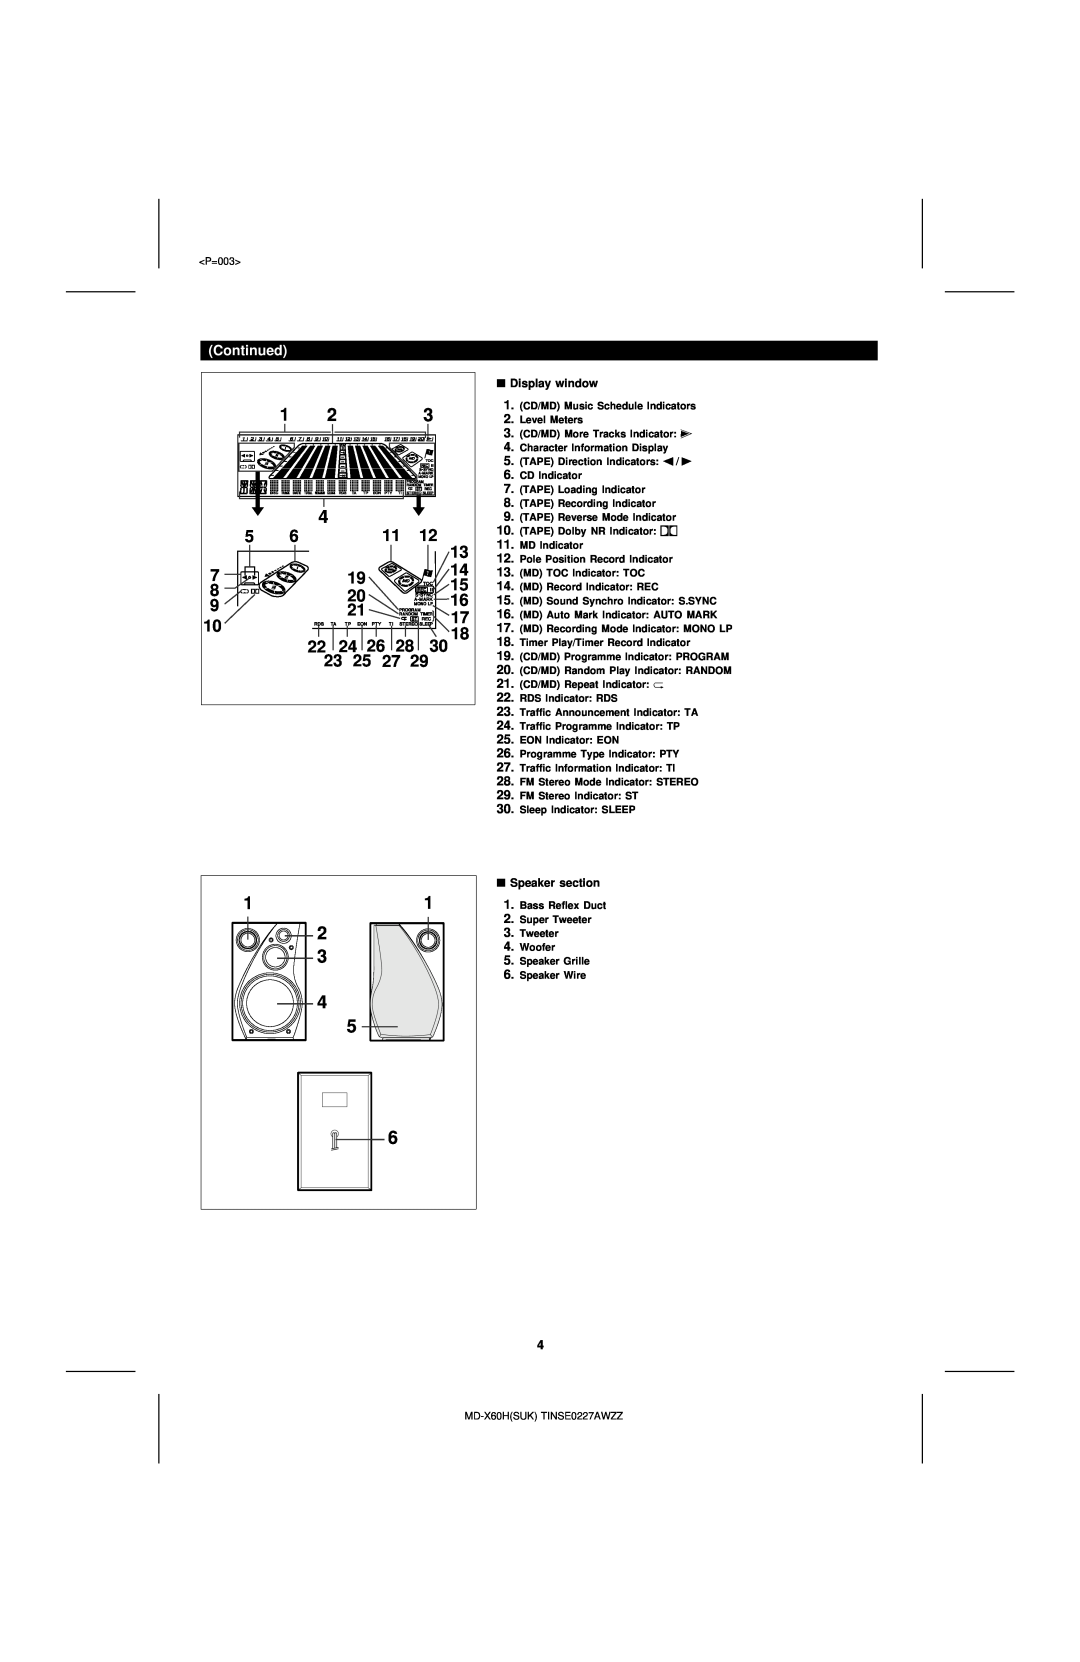 Sharp MD-X60H operation manual Continued, Display window, Speaker section 